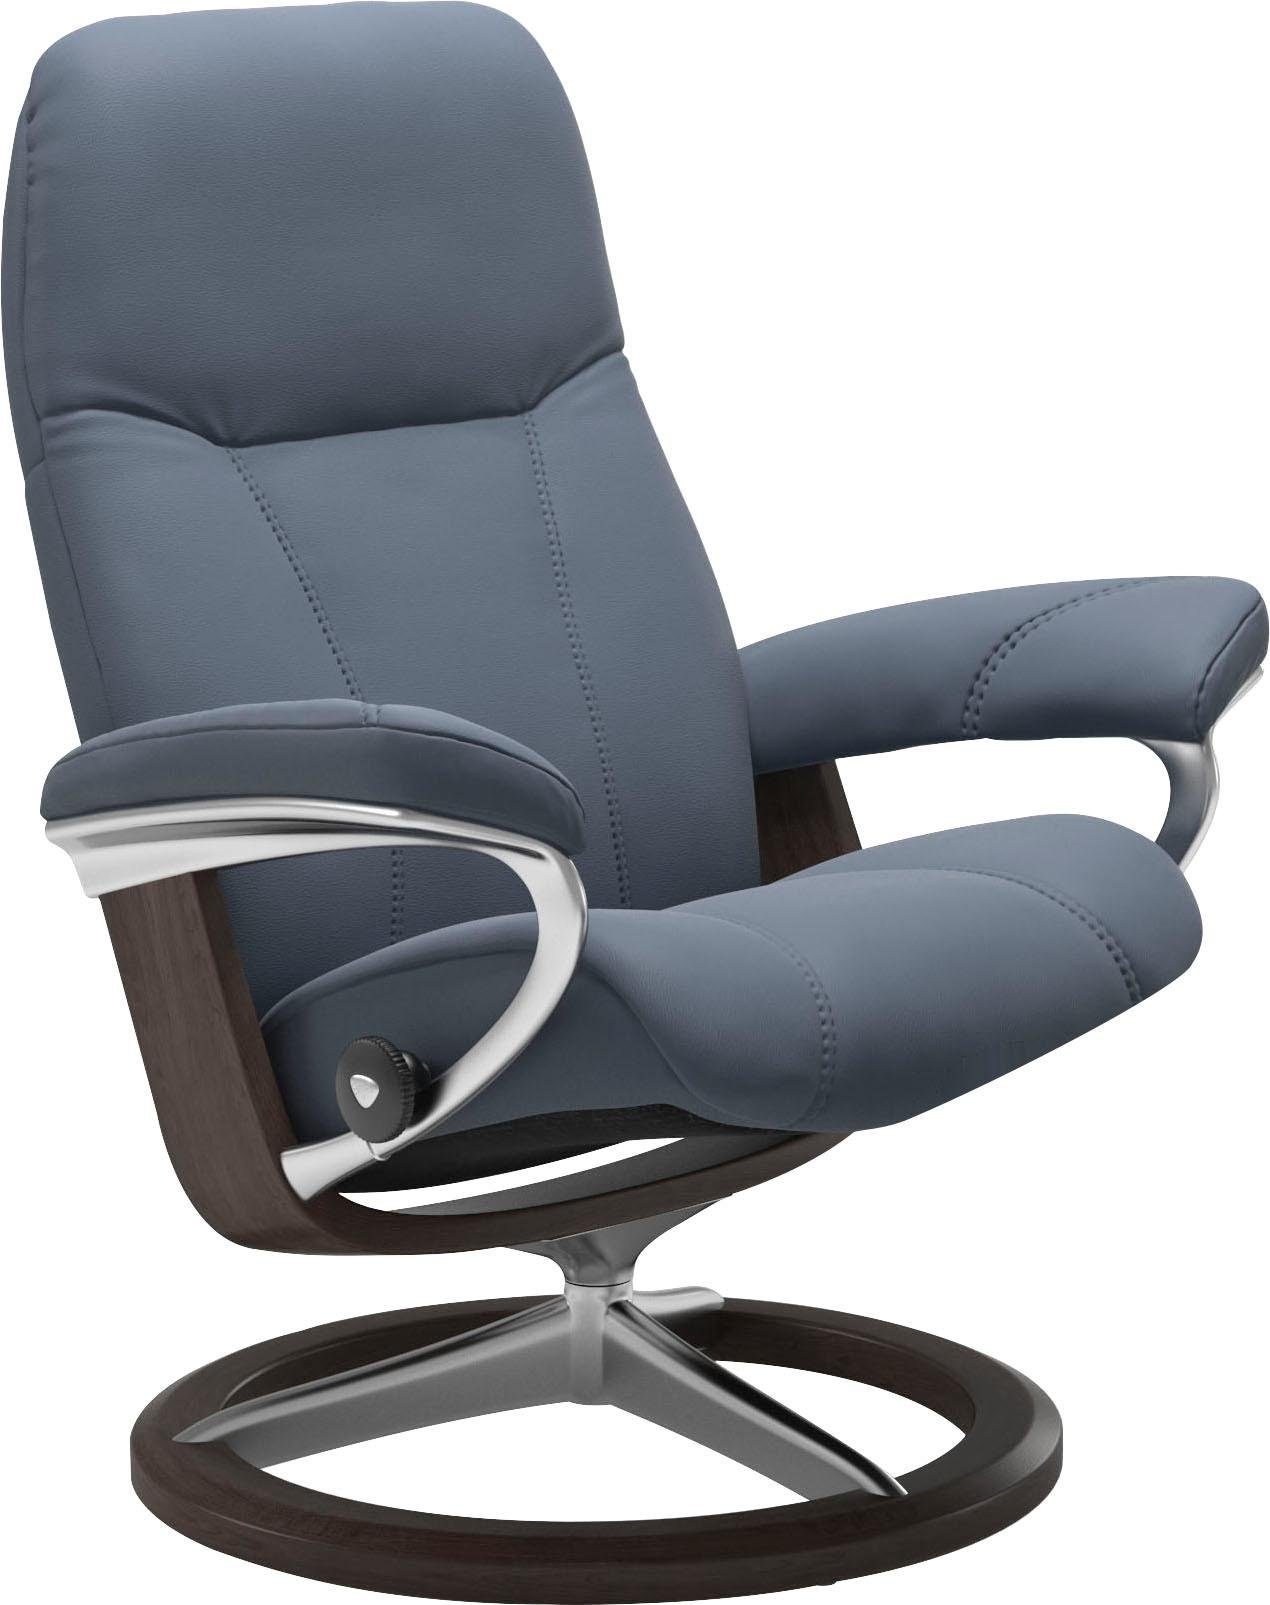 Consul, Signature Wenge Gestell L, Größe Base, Relaxsessel Stressless® mit